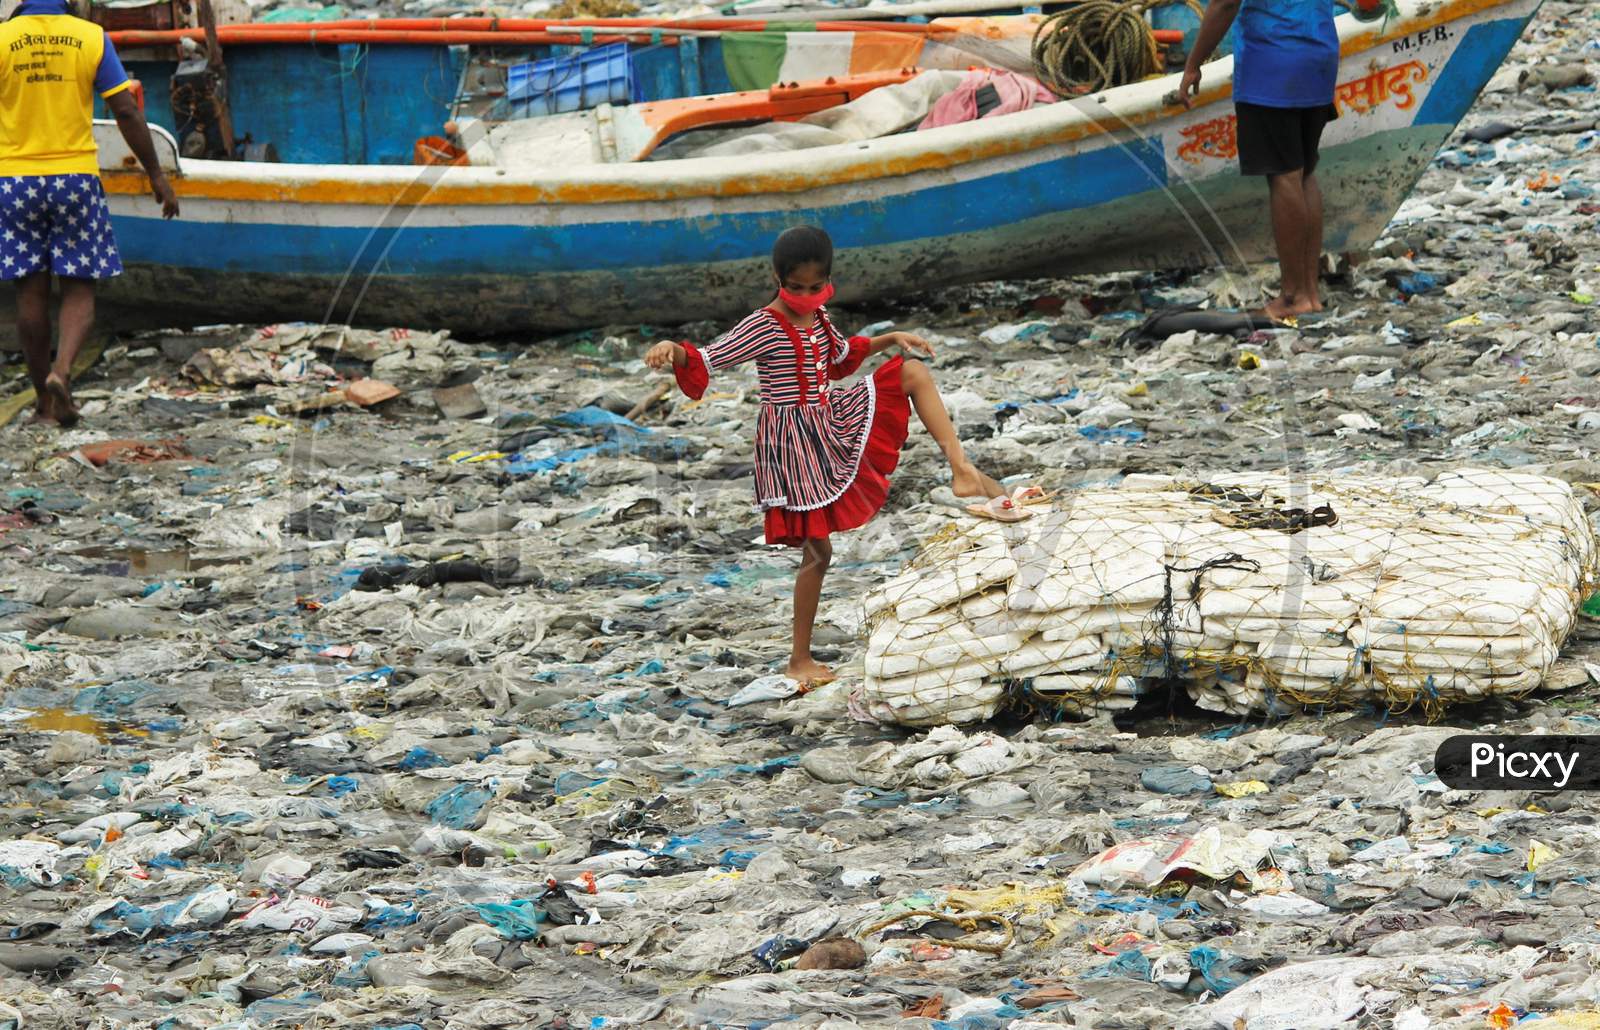 A girl plays on a beach covered with plastic waste on the occasion of World Environment Day, in Mumbai, India on June 5, 2020.